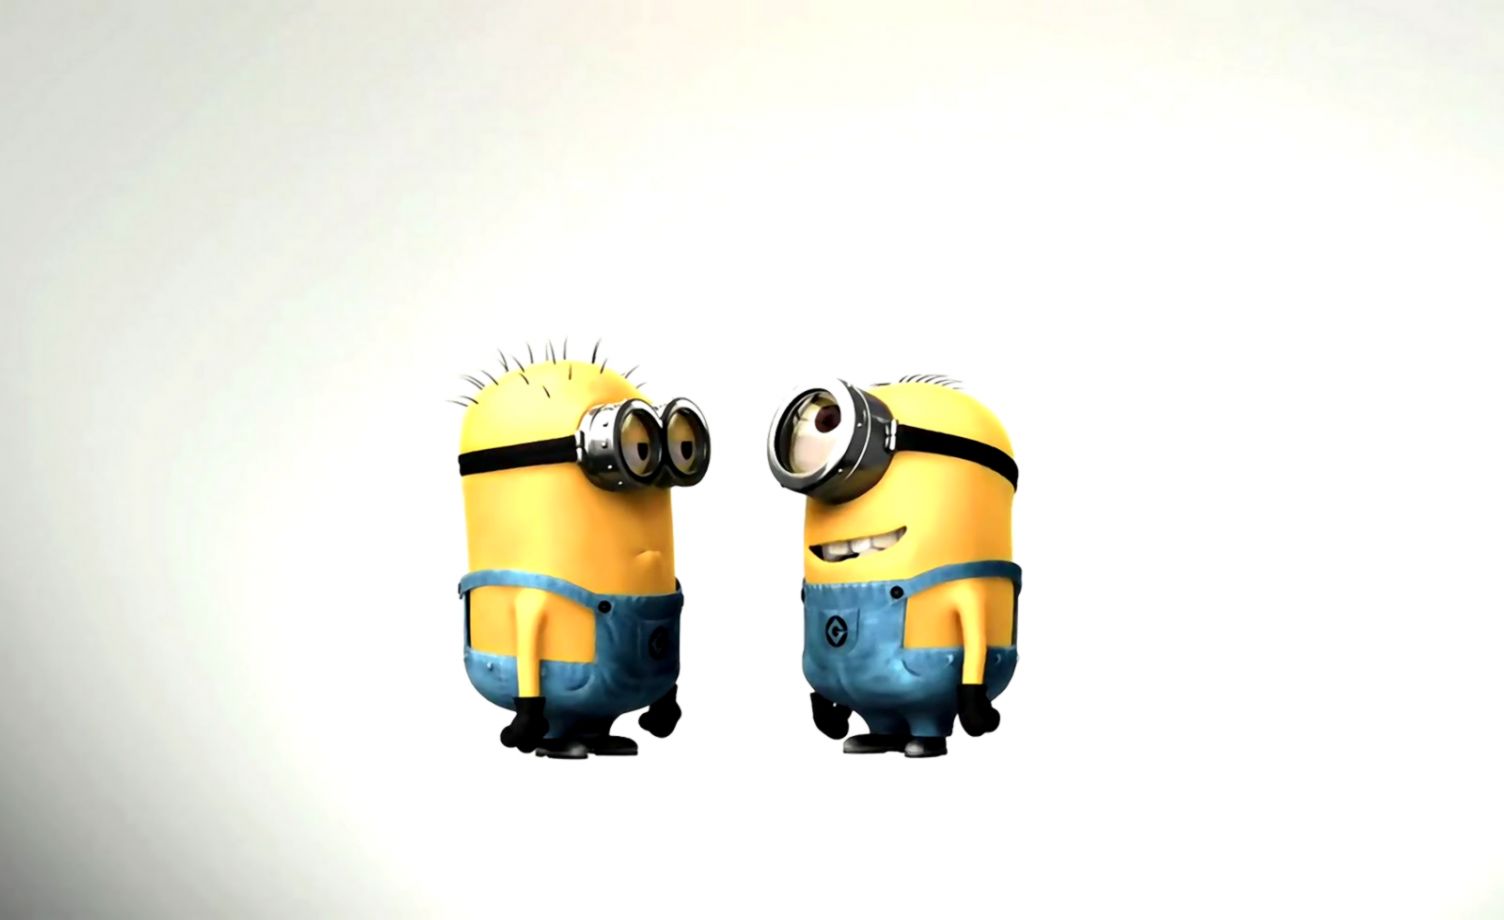 Minion Wallpaper Hd Free Download - Crazy Quotes About Friendship Goals , HD Wallpaper & Backgrounds